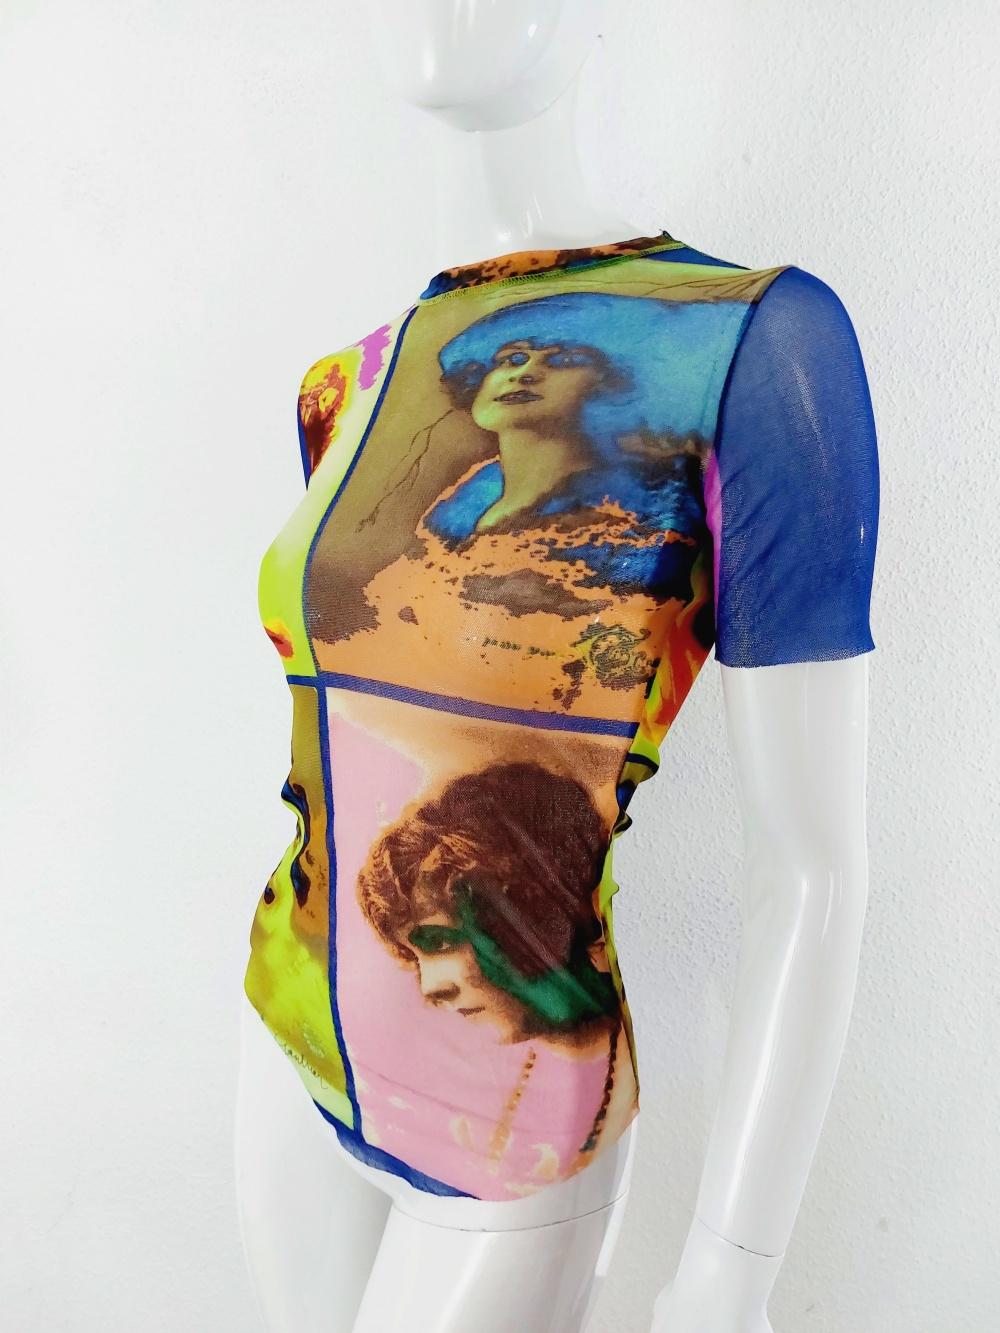 Jean Paul Gaultier Kylie Jenner Kim Mesh Portrait Saturated Faces Top Shirt Tee For Sale 1